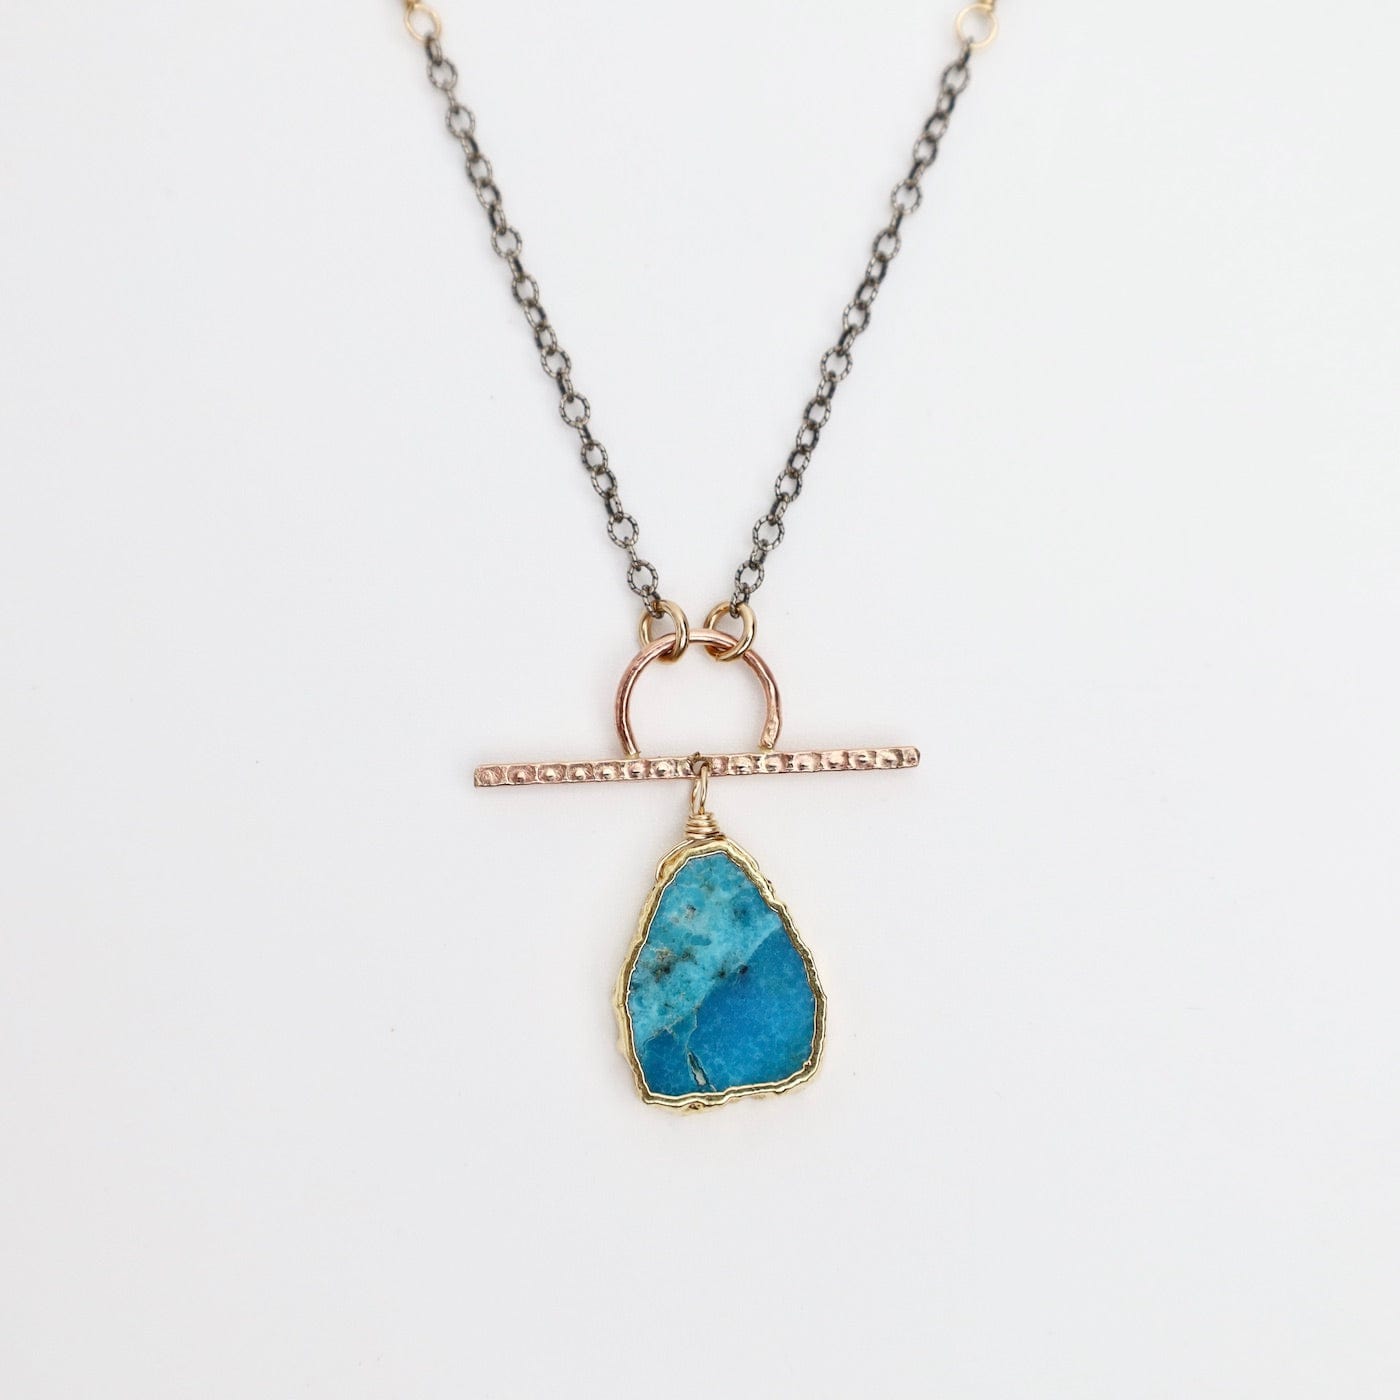 NKL-GF Turquoise Slice Pendant Necklace